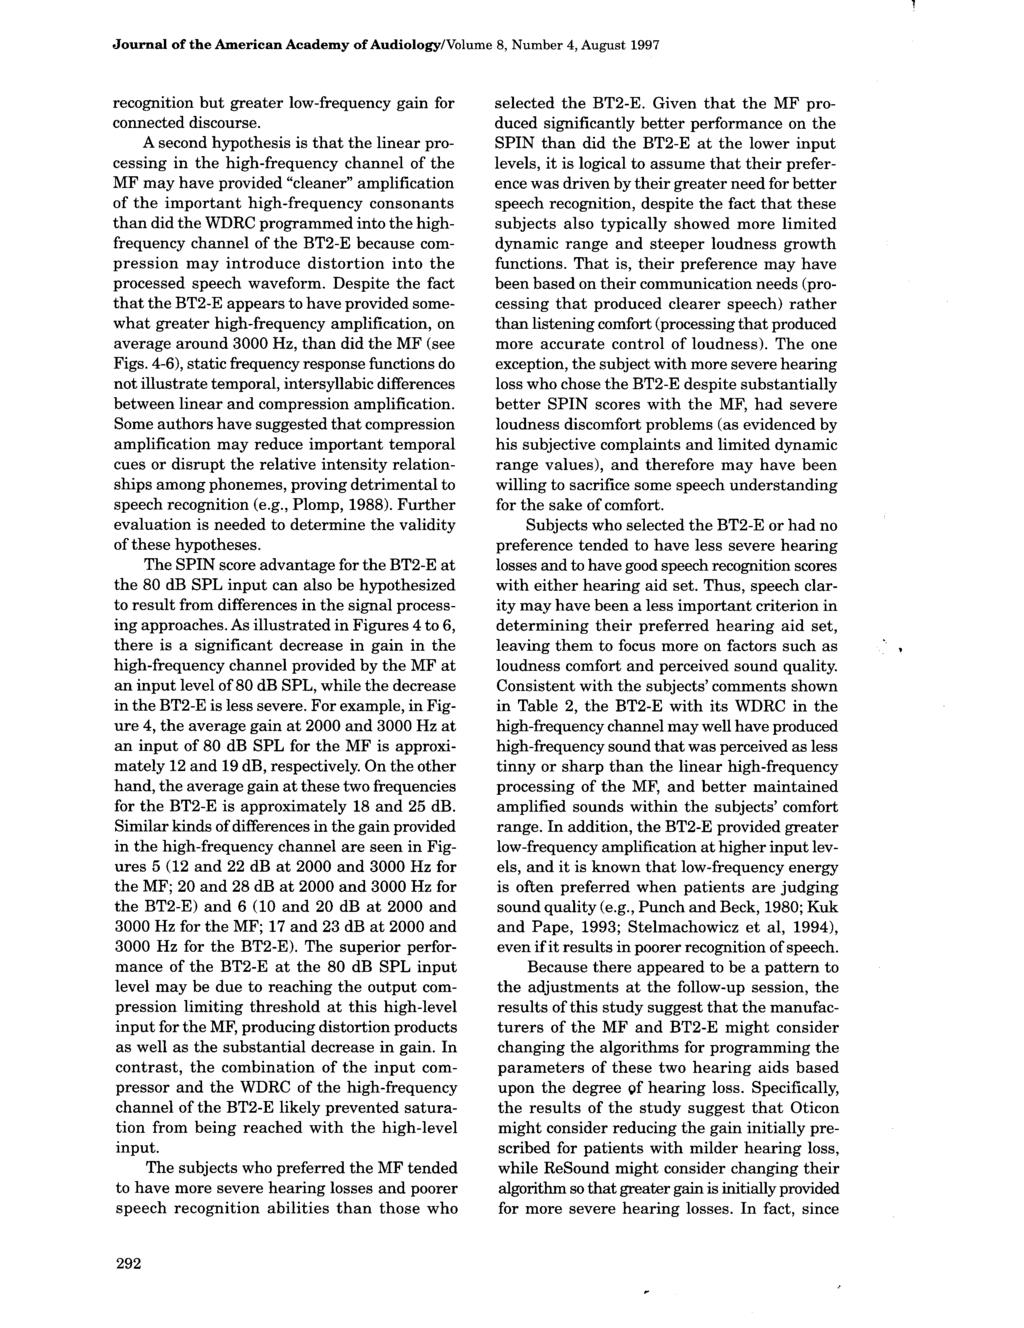 Journal of the American Academy of Audiology/Volume 8, Number 4, August 1997 recognition but greater low-frequency gain for connected discourse.